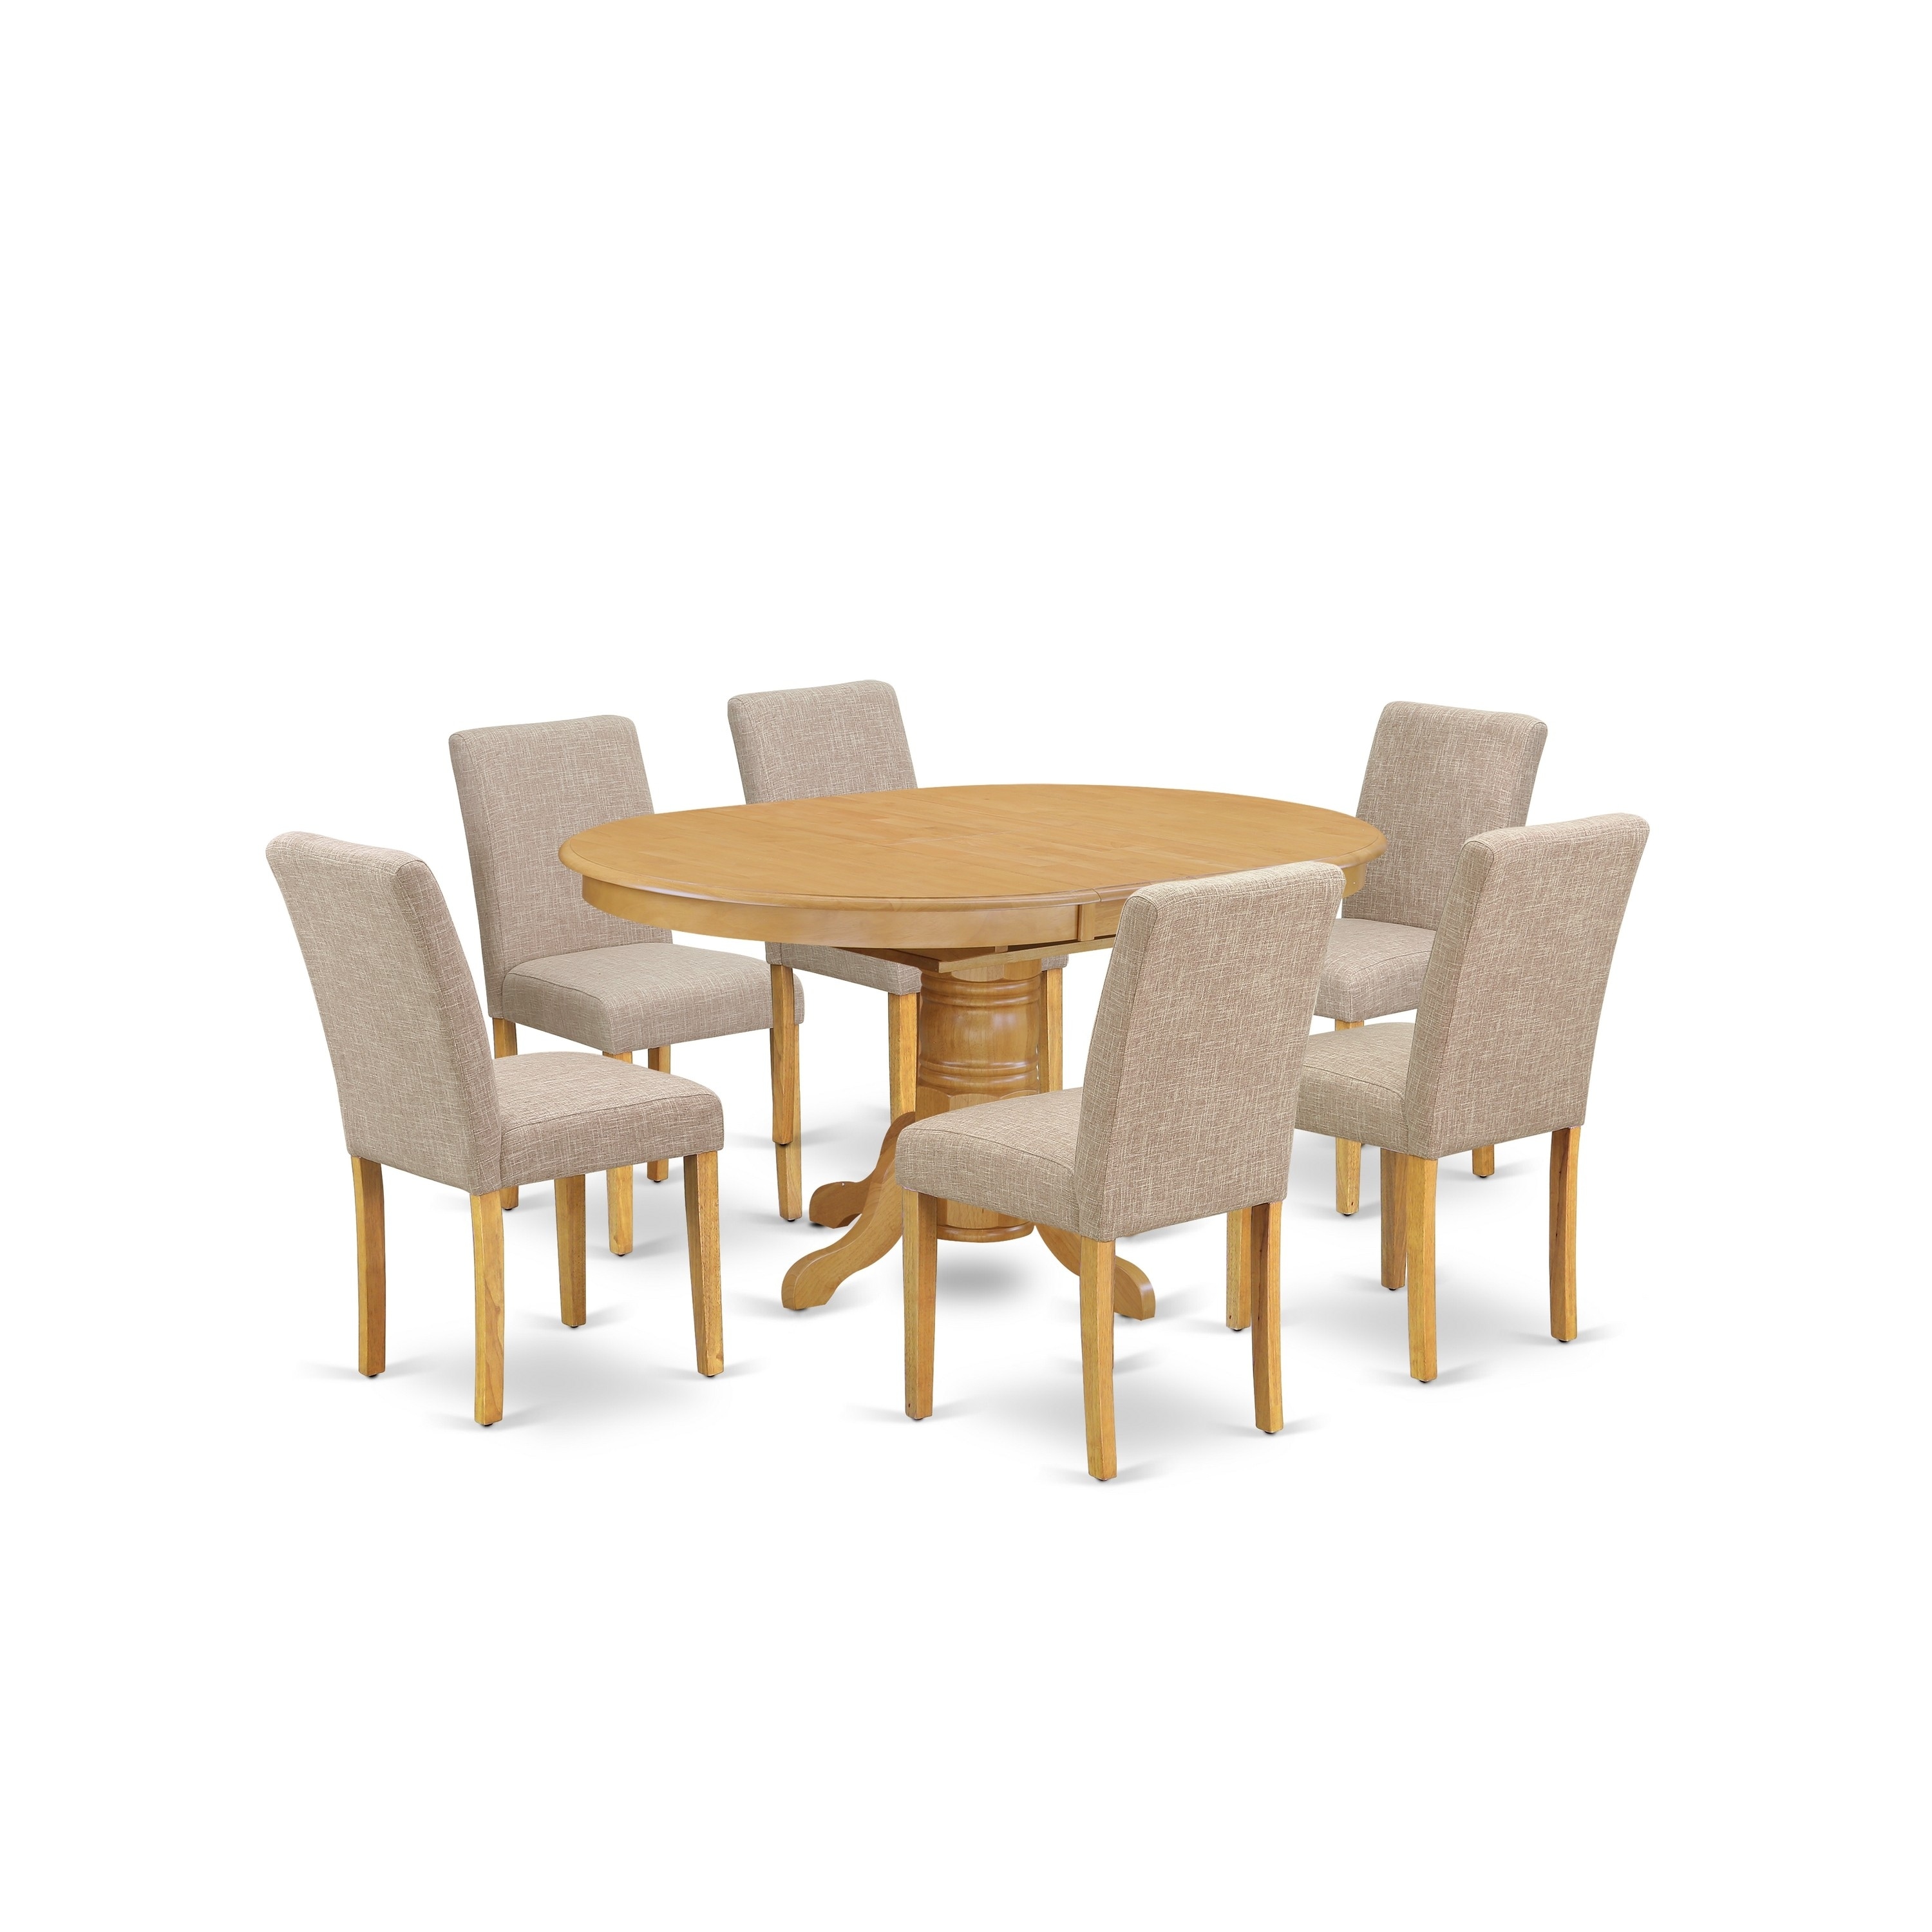 East West Furniture Dining Table Set Includes an Oval Kitchen Table and Light Tan Parson Chairs, Oak (Pieces Options) - AVAB7-OAK-04